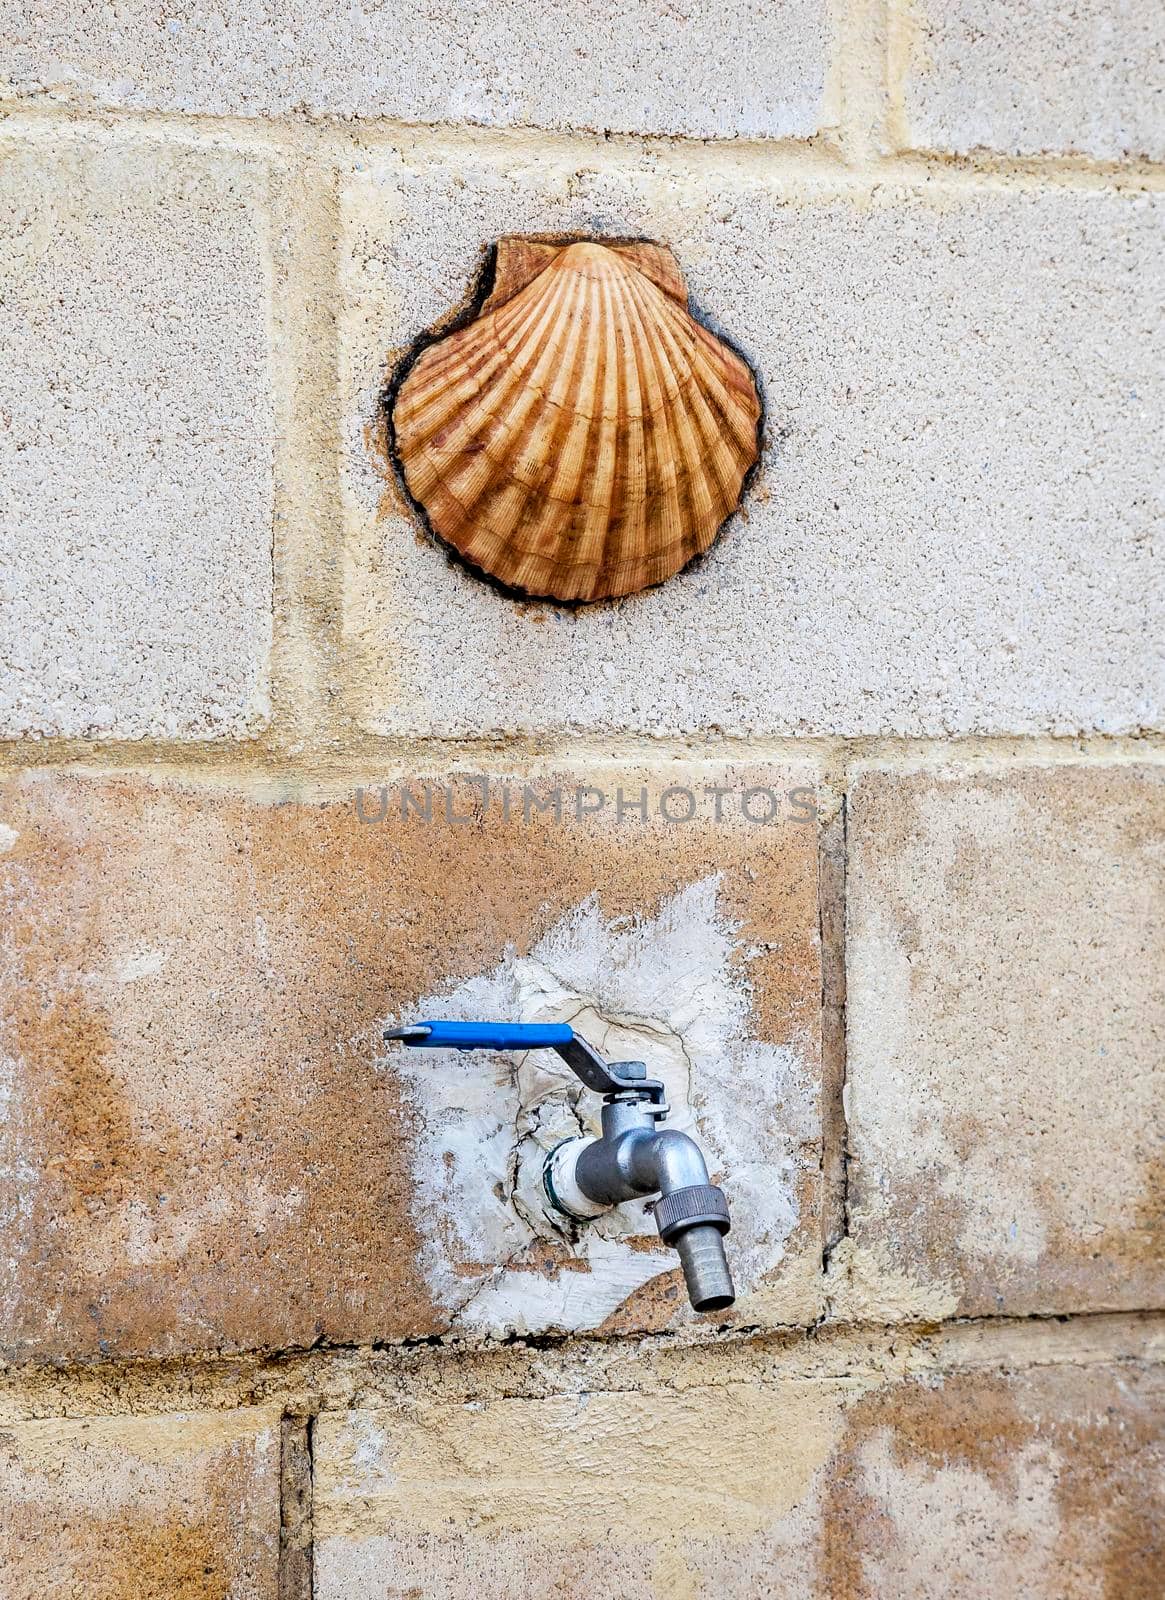 Tap for drinking water on Camino de Santiago, piligrimage route